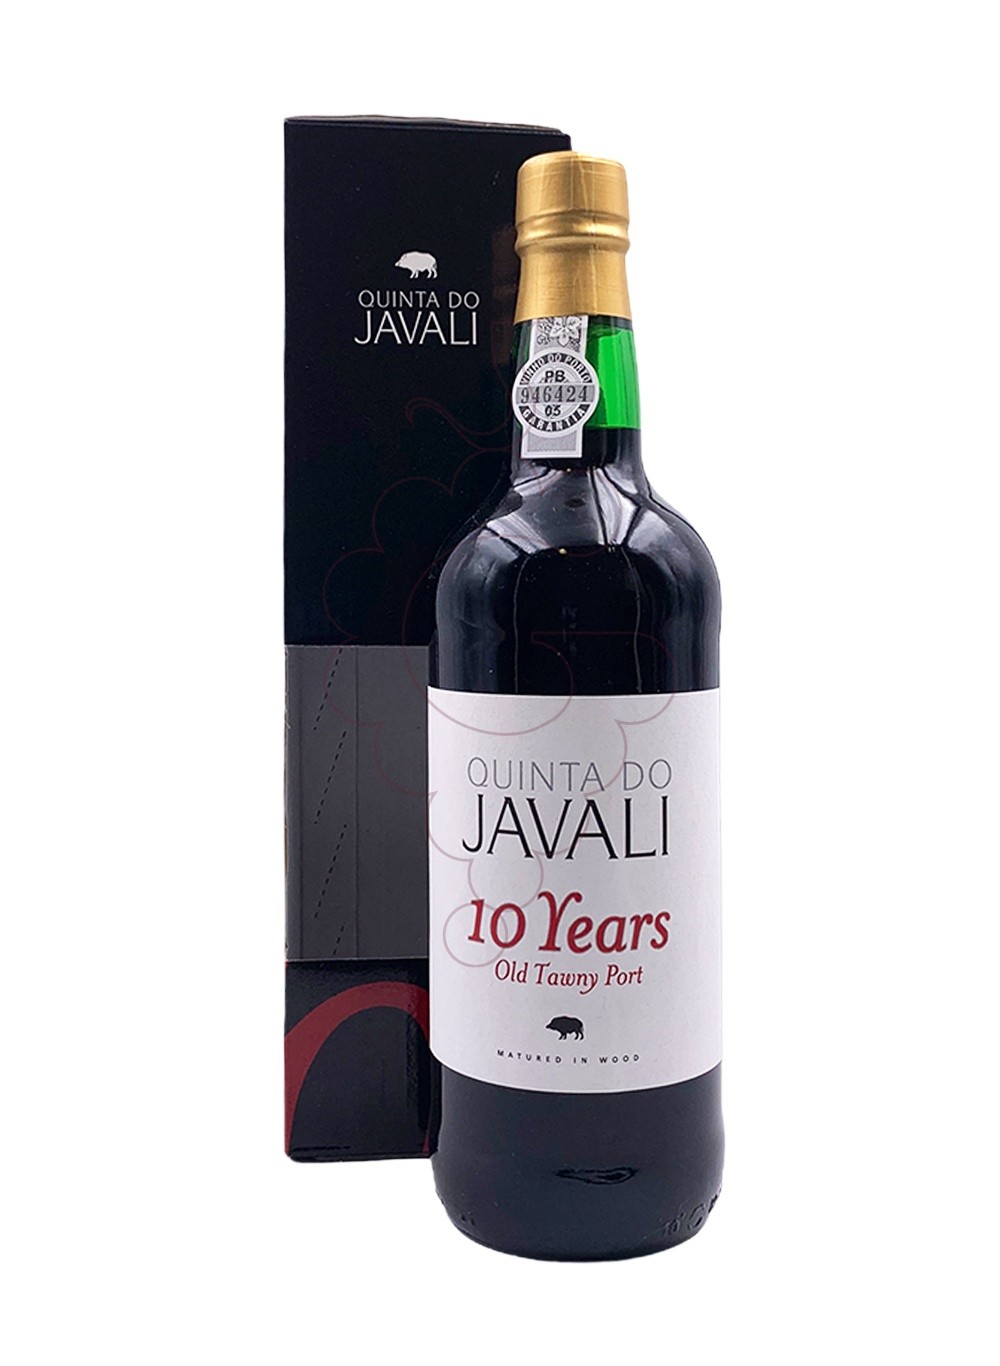 Photo Quinta do Javali 10 Years fortified wine